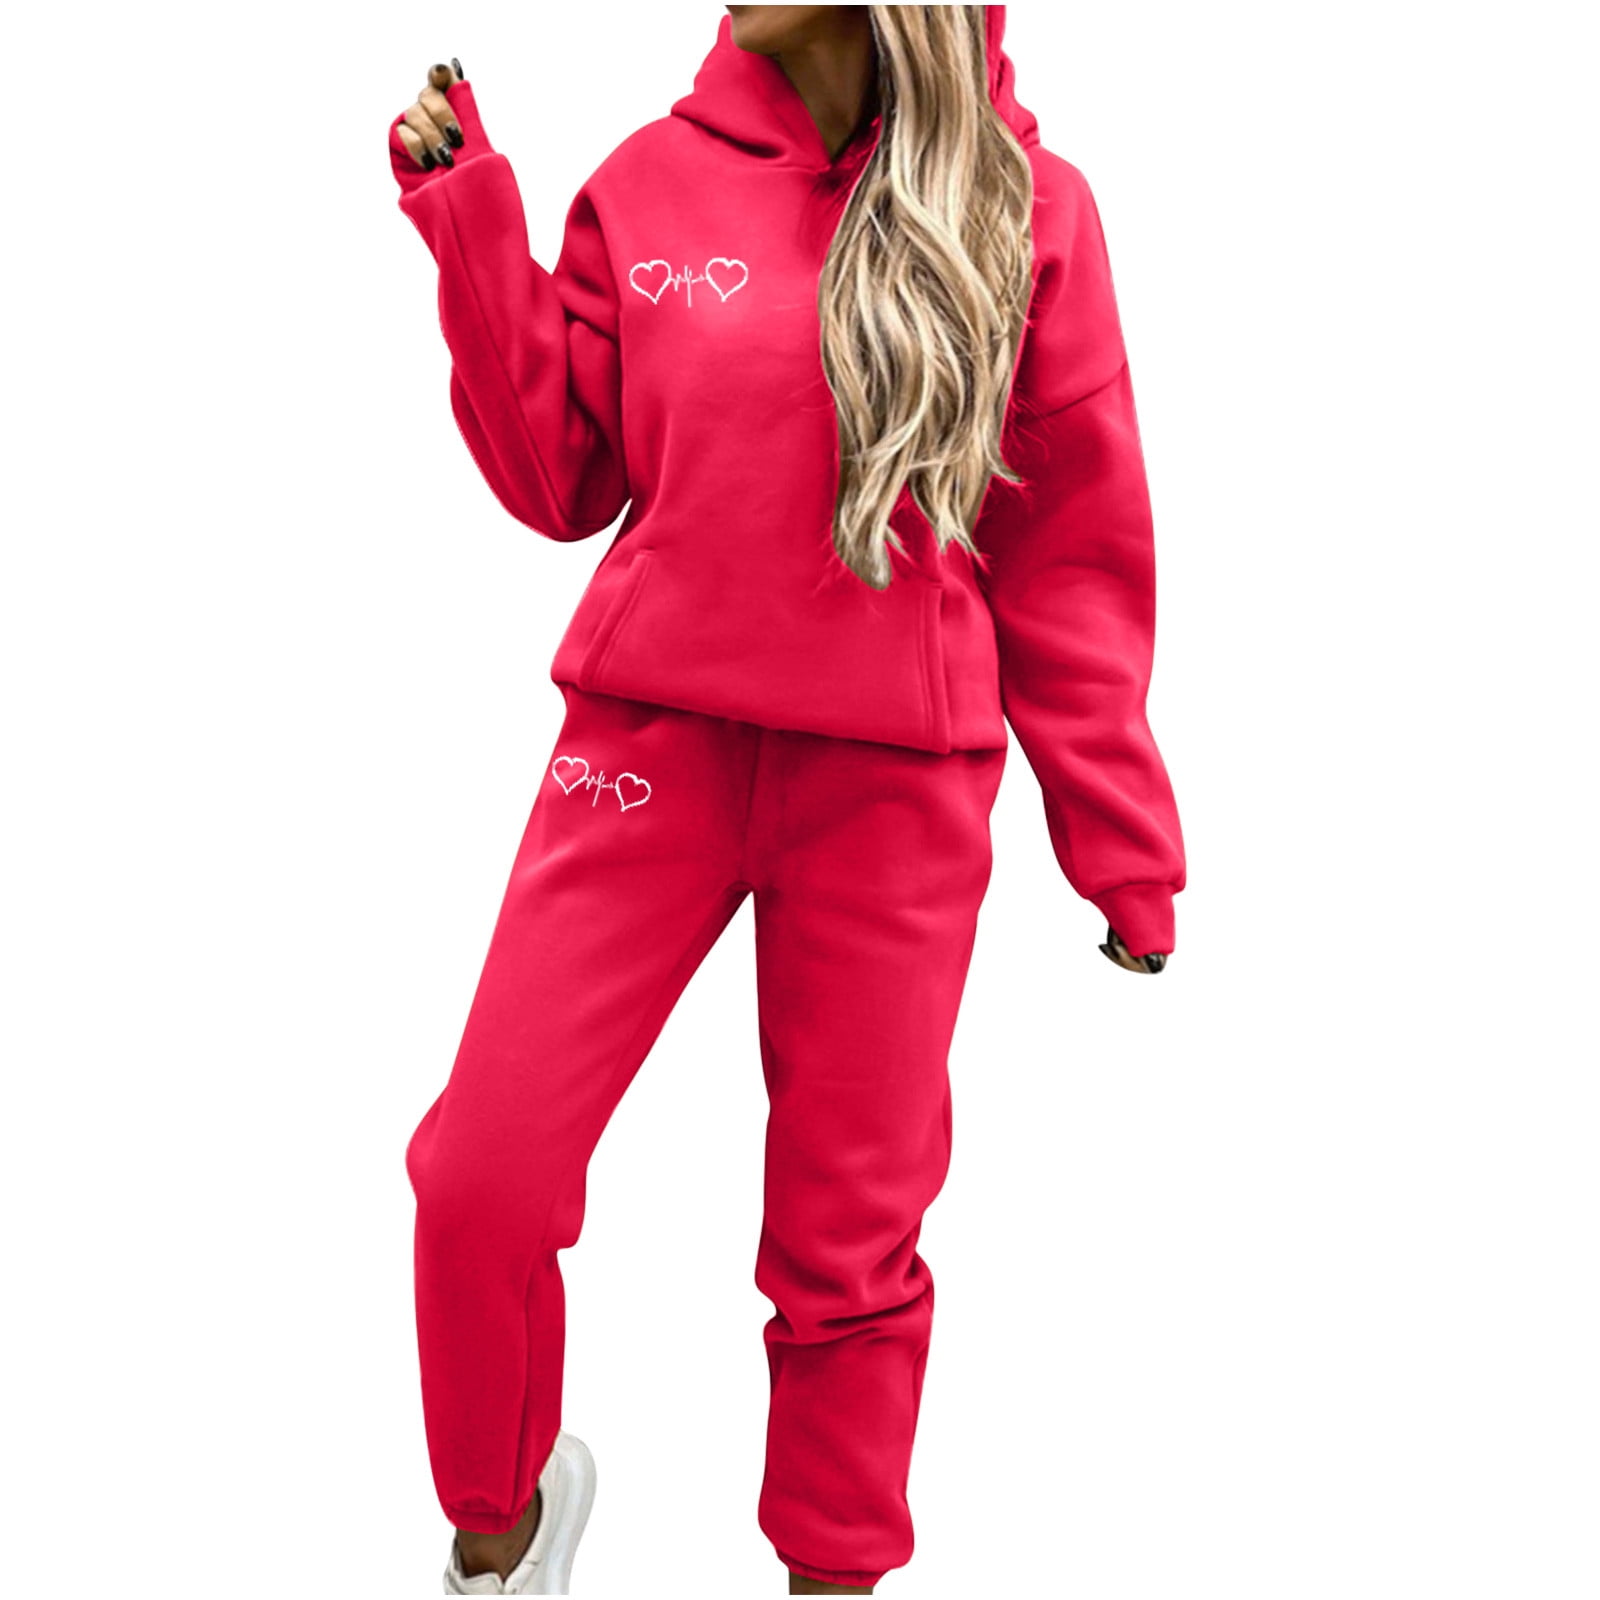 RQYYD Sweatsuits for Women Set 2 Piece Outfits Love Graphic Long Sleeve  Hoodie Sweatshirt and Jogger Pants Valentine's Day Tracksuit Suit Red XL 